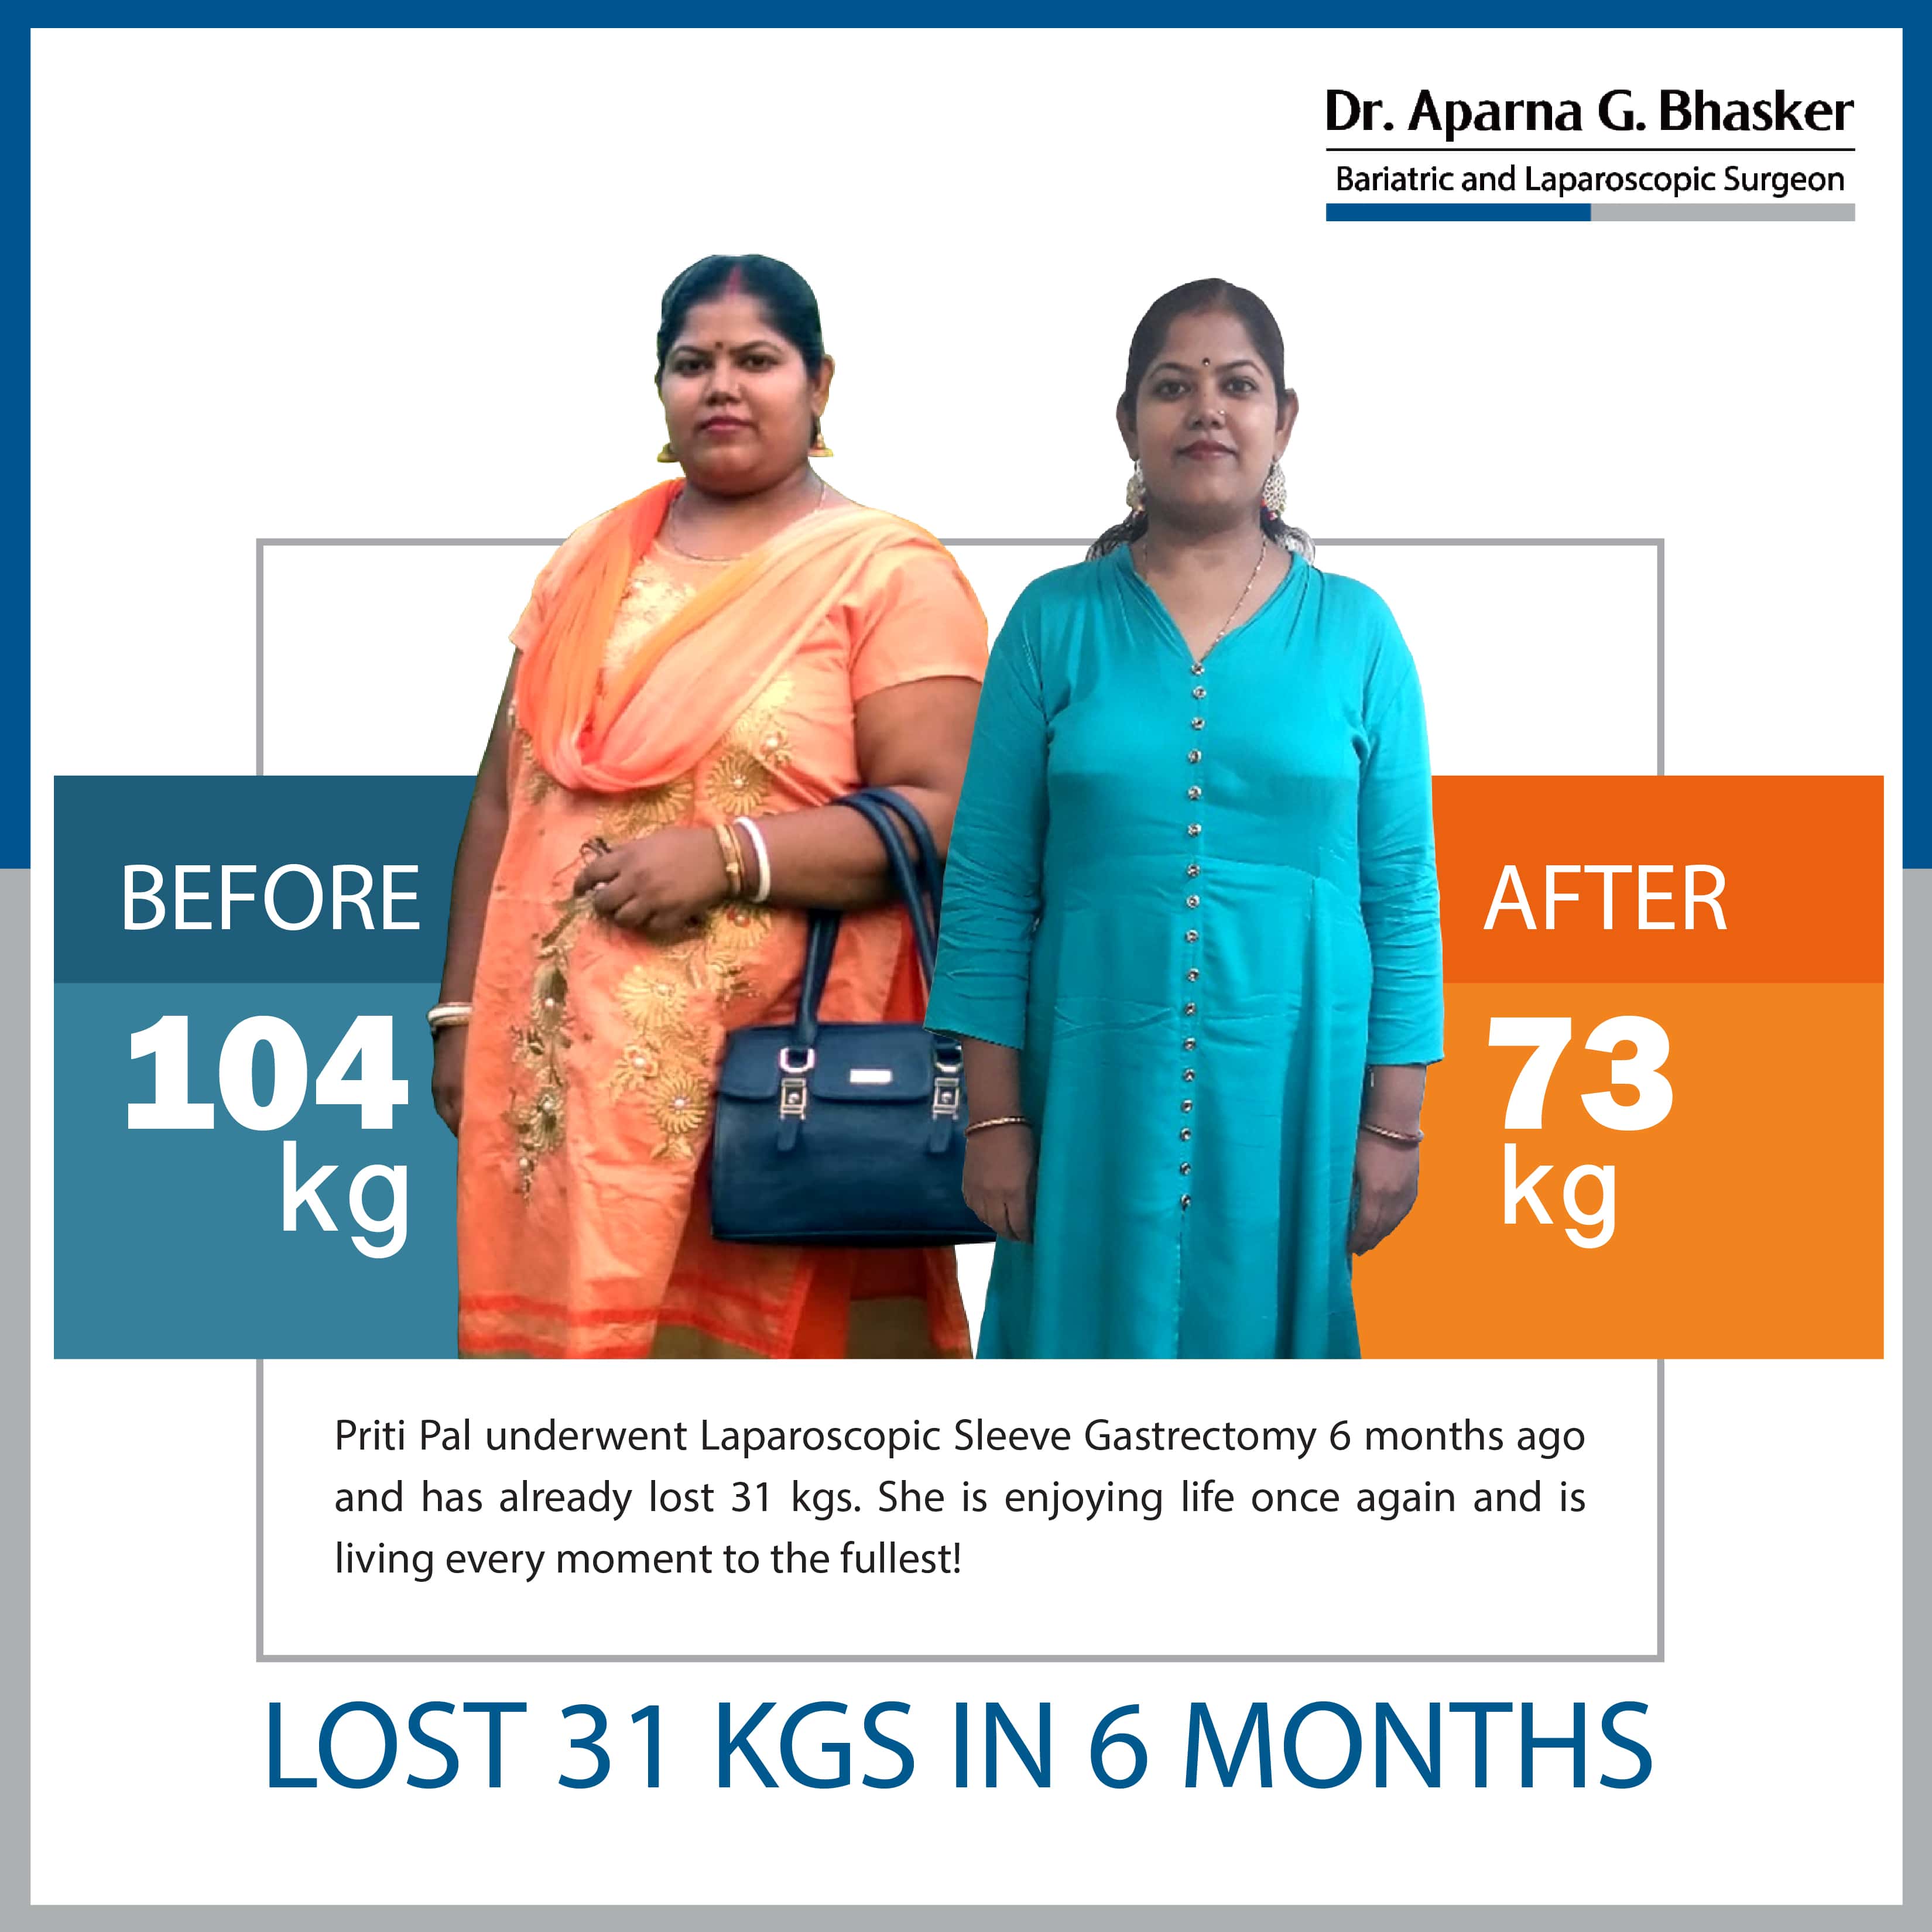 best Mini Gastric Bypass bariatric surgery and weight loss surgery cost in mumbai india before after photos (5)